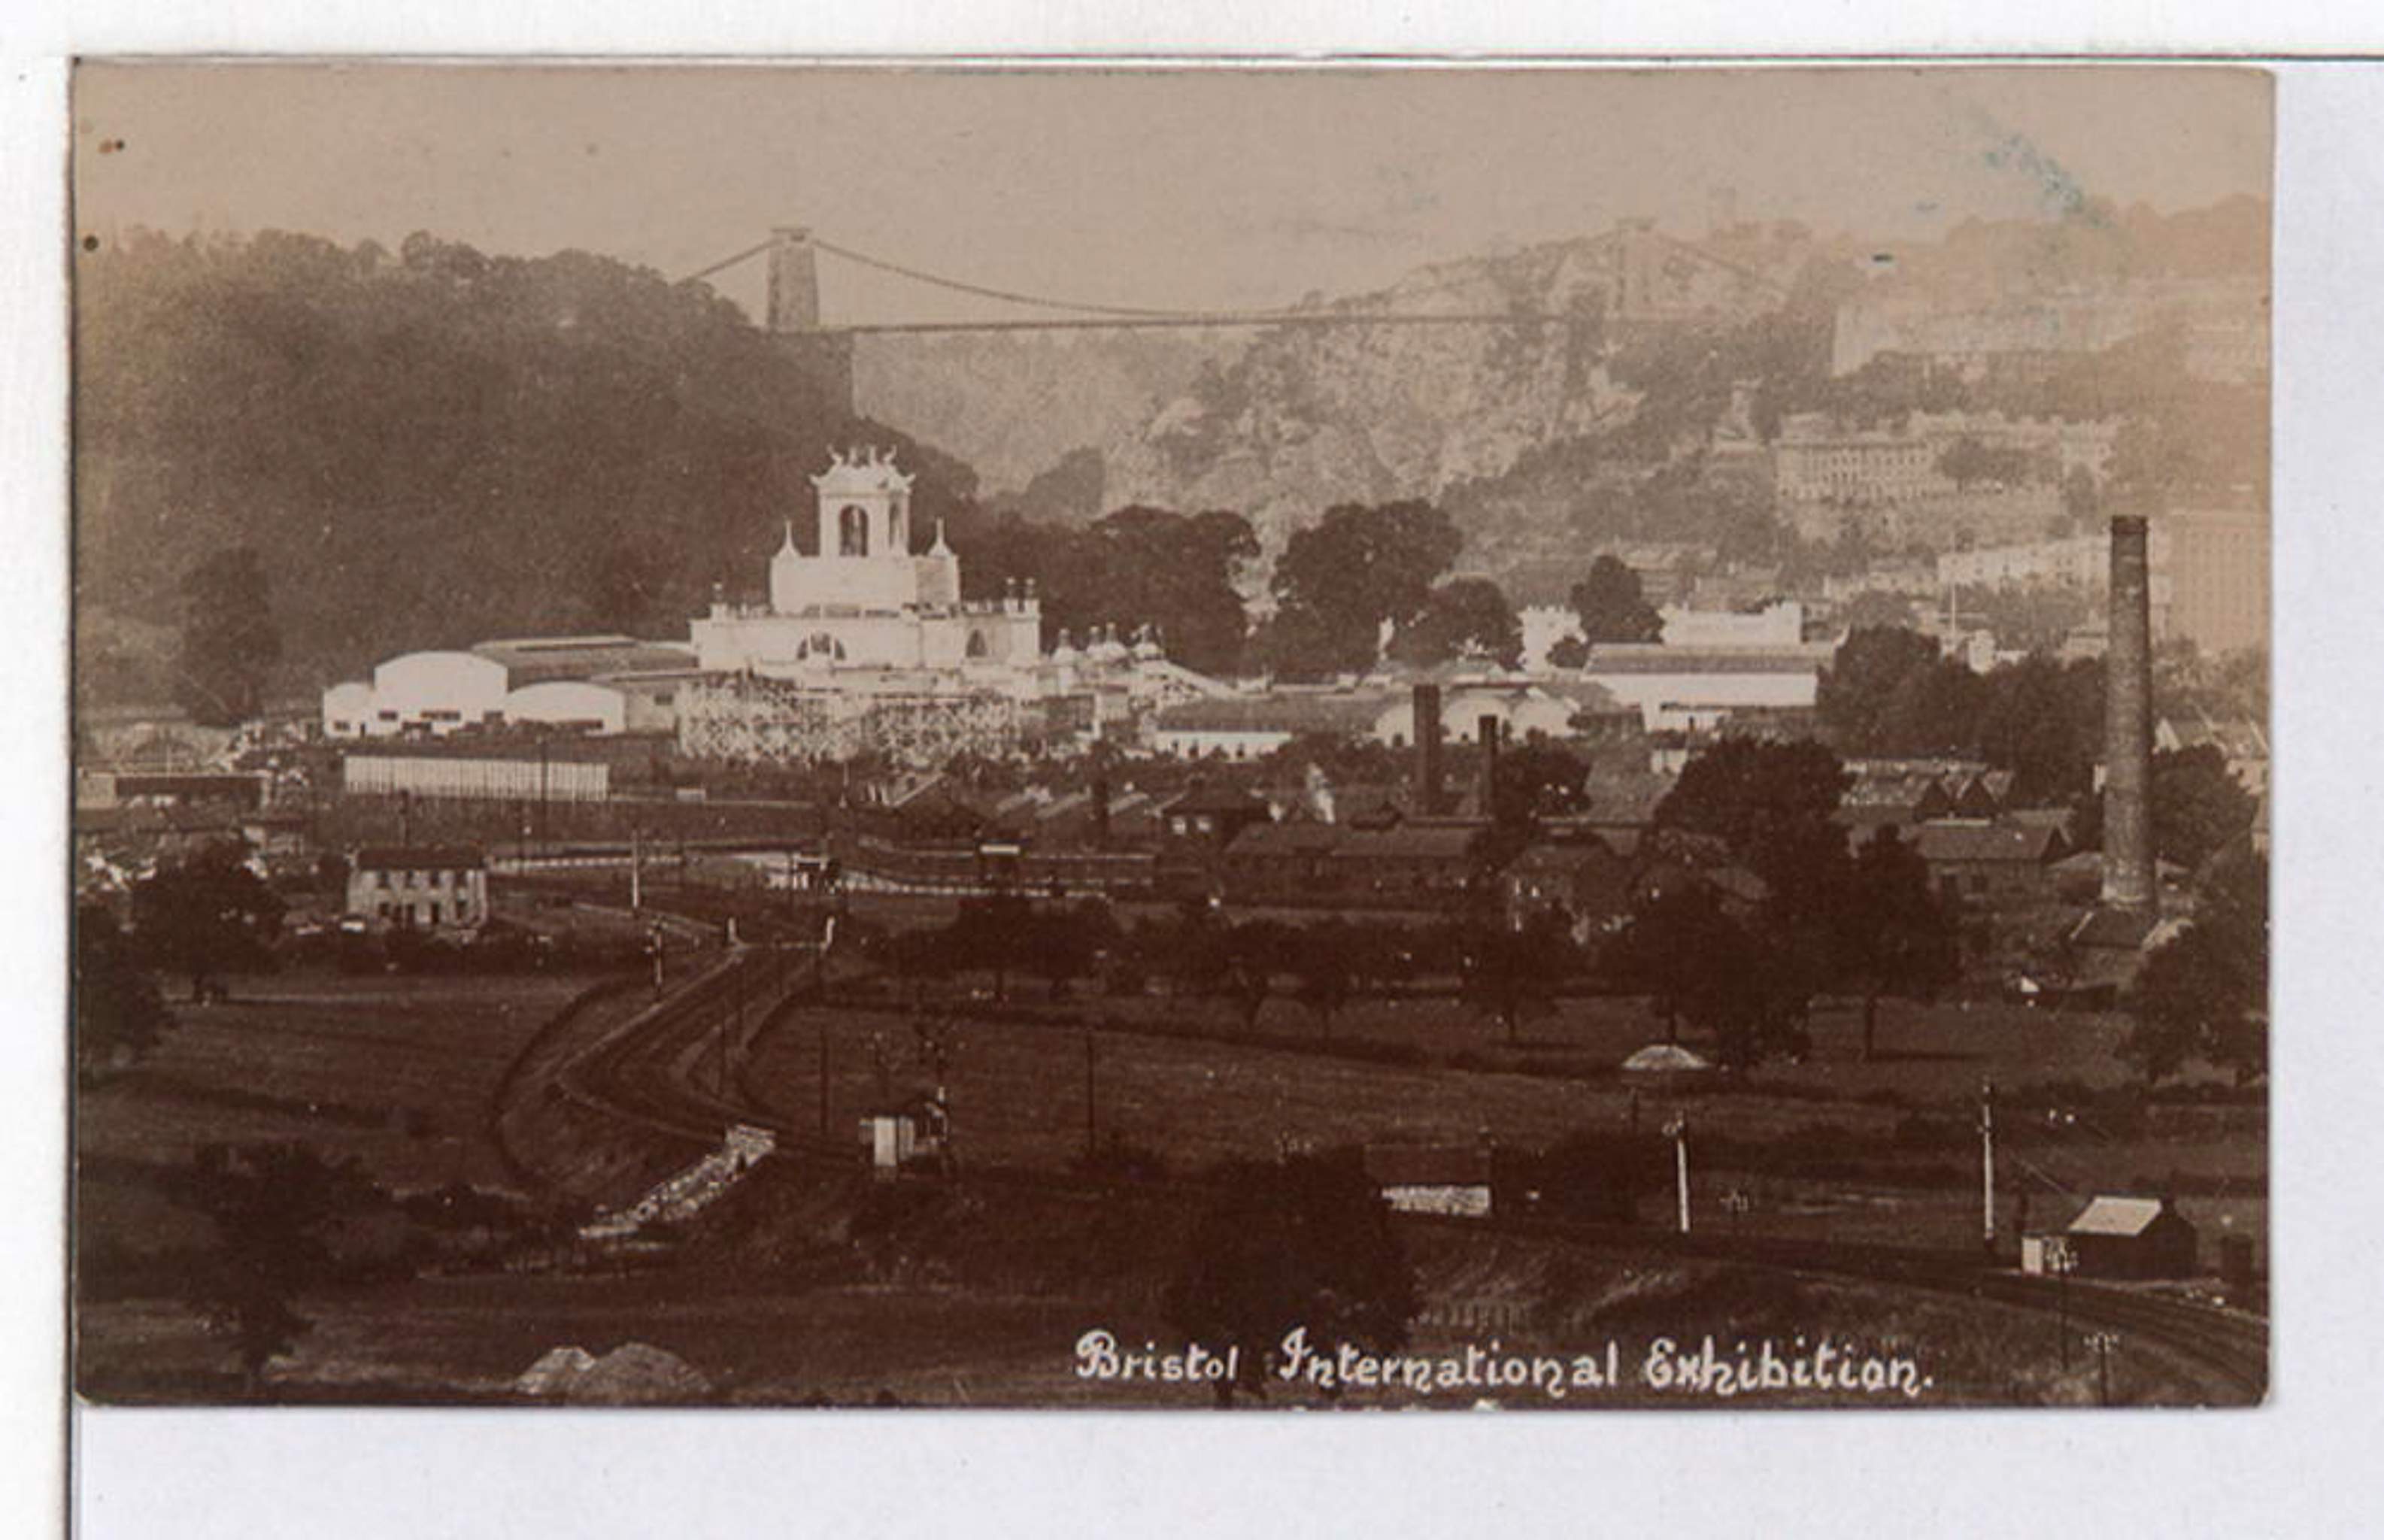 Historical: Bristol International Exhibition
Source: Bristol Archives, Vaughan Collection.

Here we look, apparently from Bedminster Down, towards the "white city", the Bristol International E...